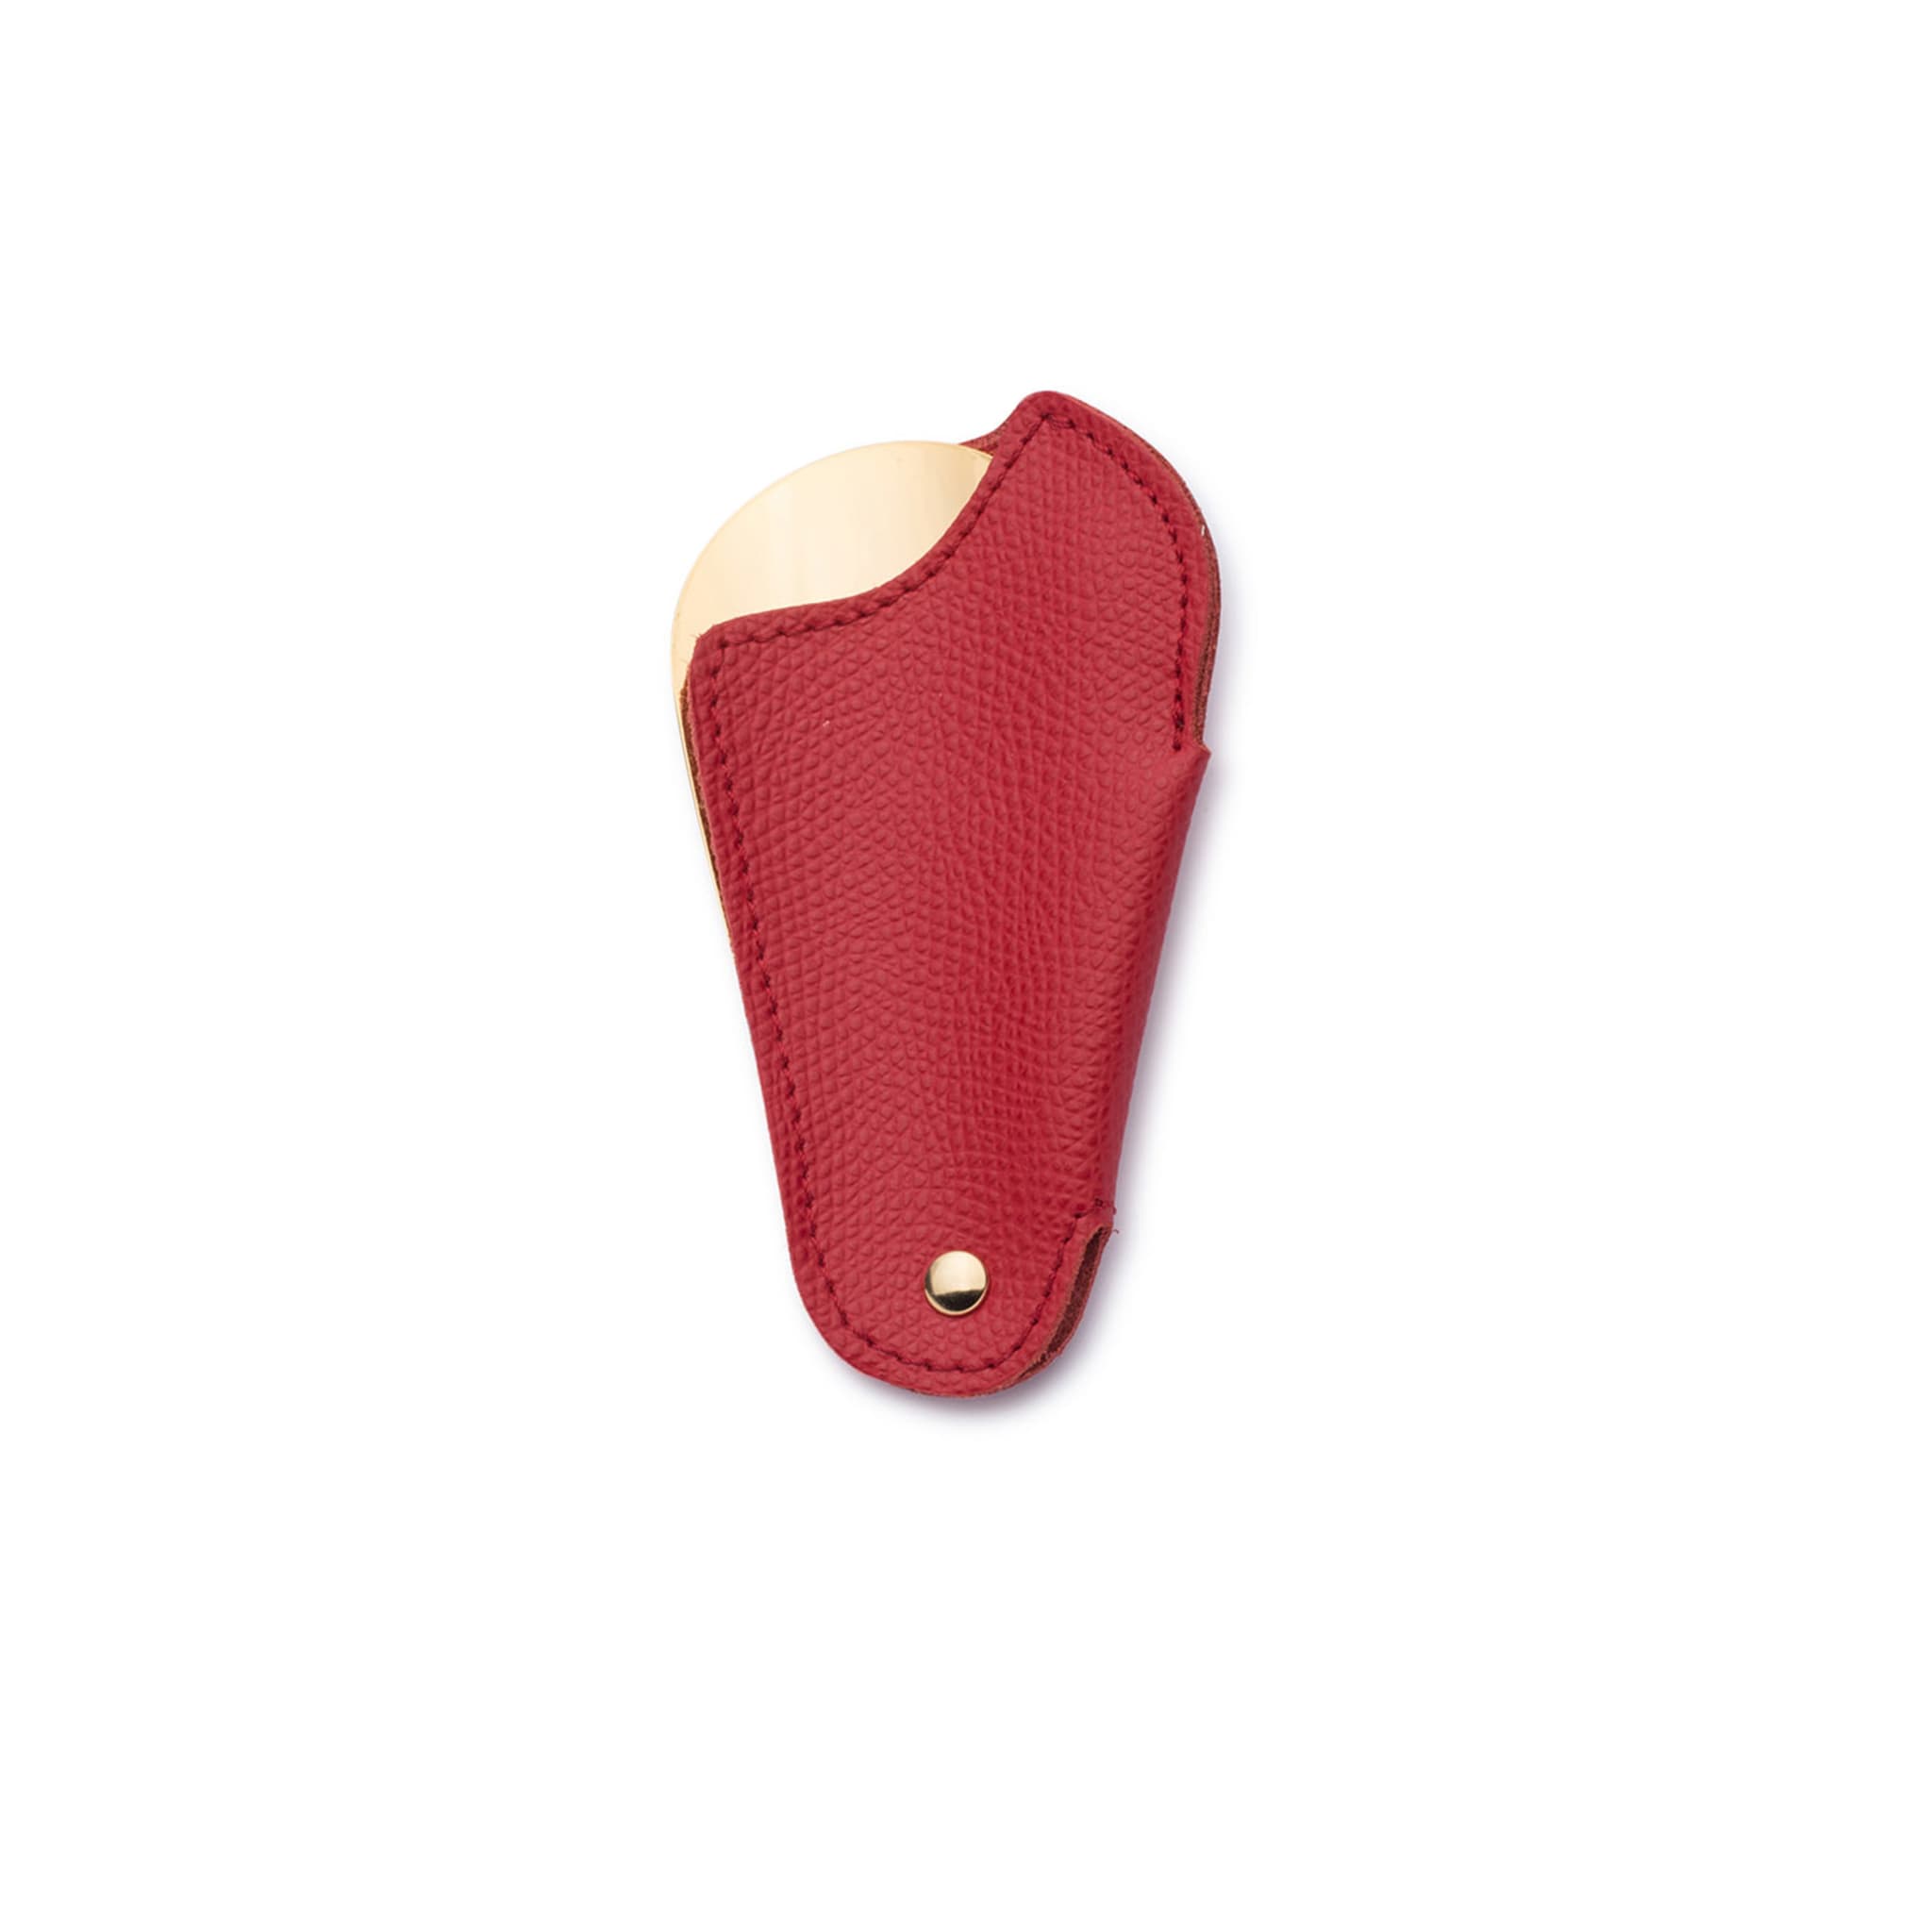 Red & Gold Hammered Leather Travel Shoe Horn - Alternative view 1